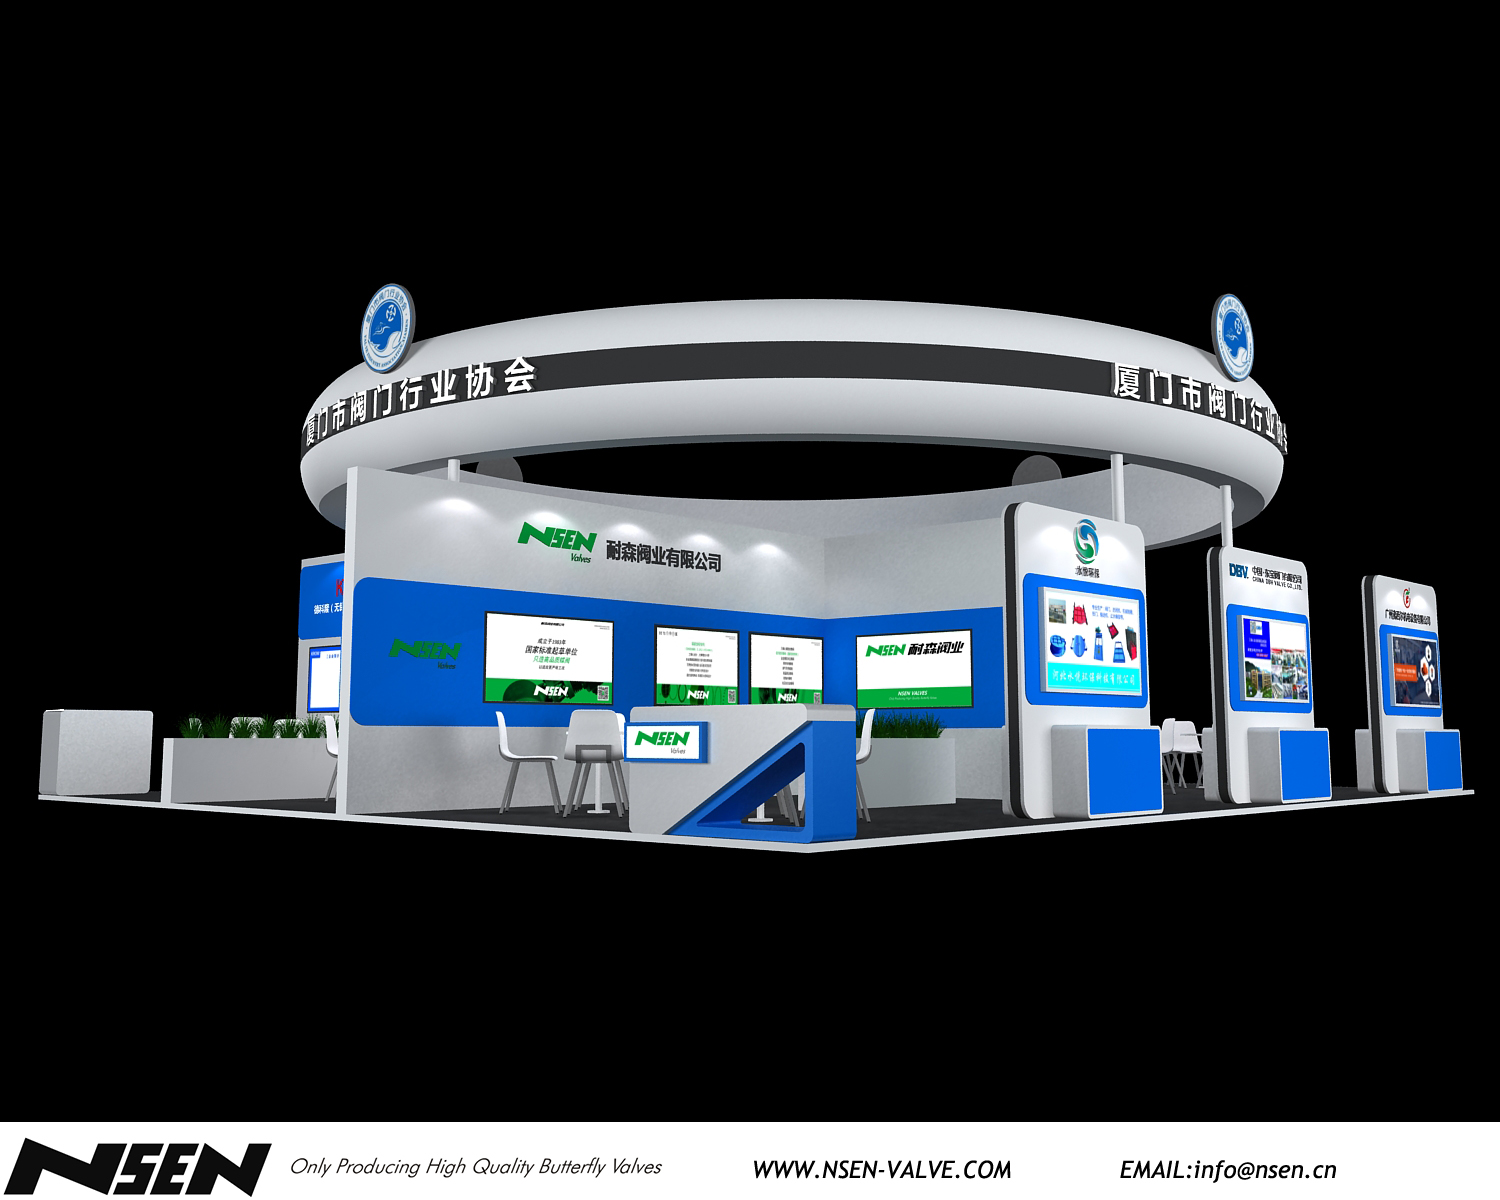 Ontmoet NSEN by stand J5 in IFME 2020